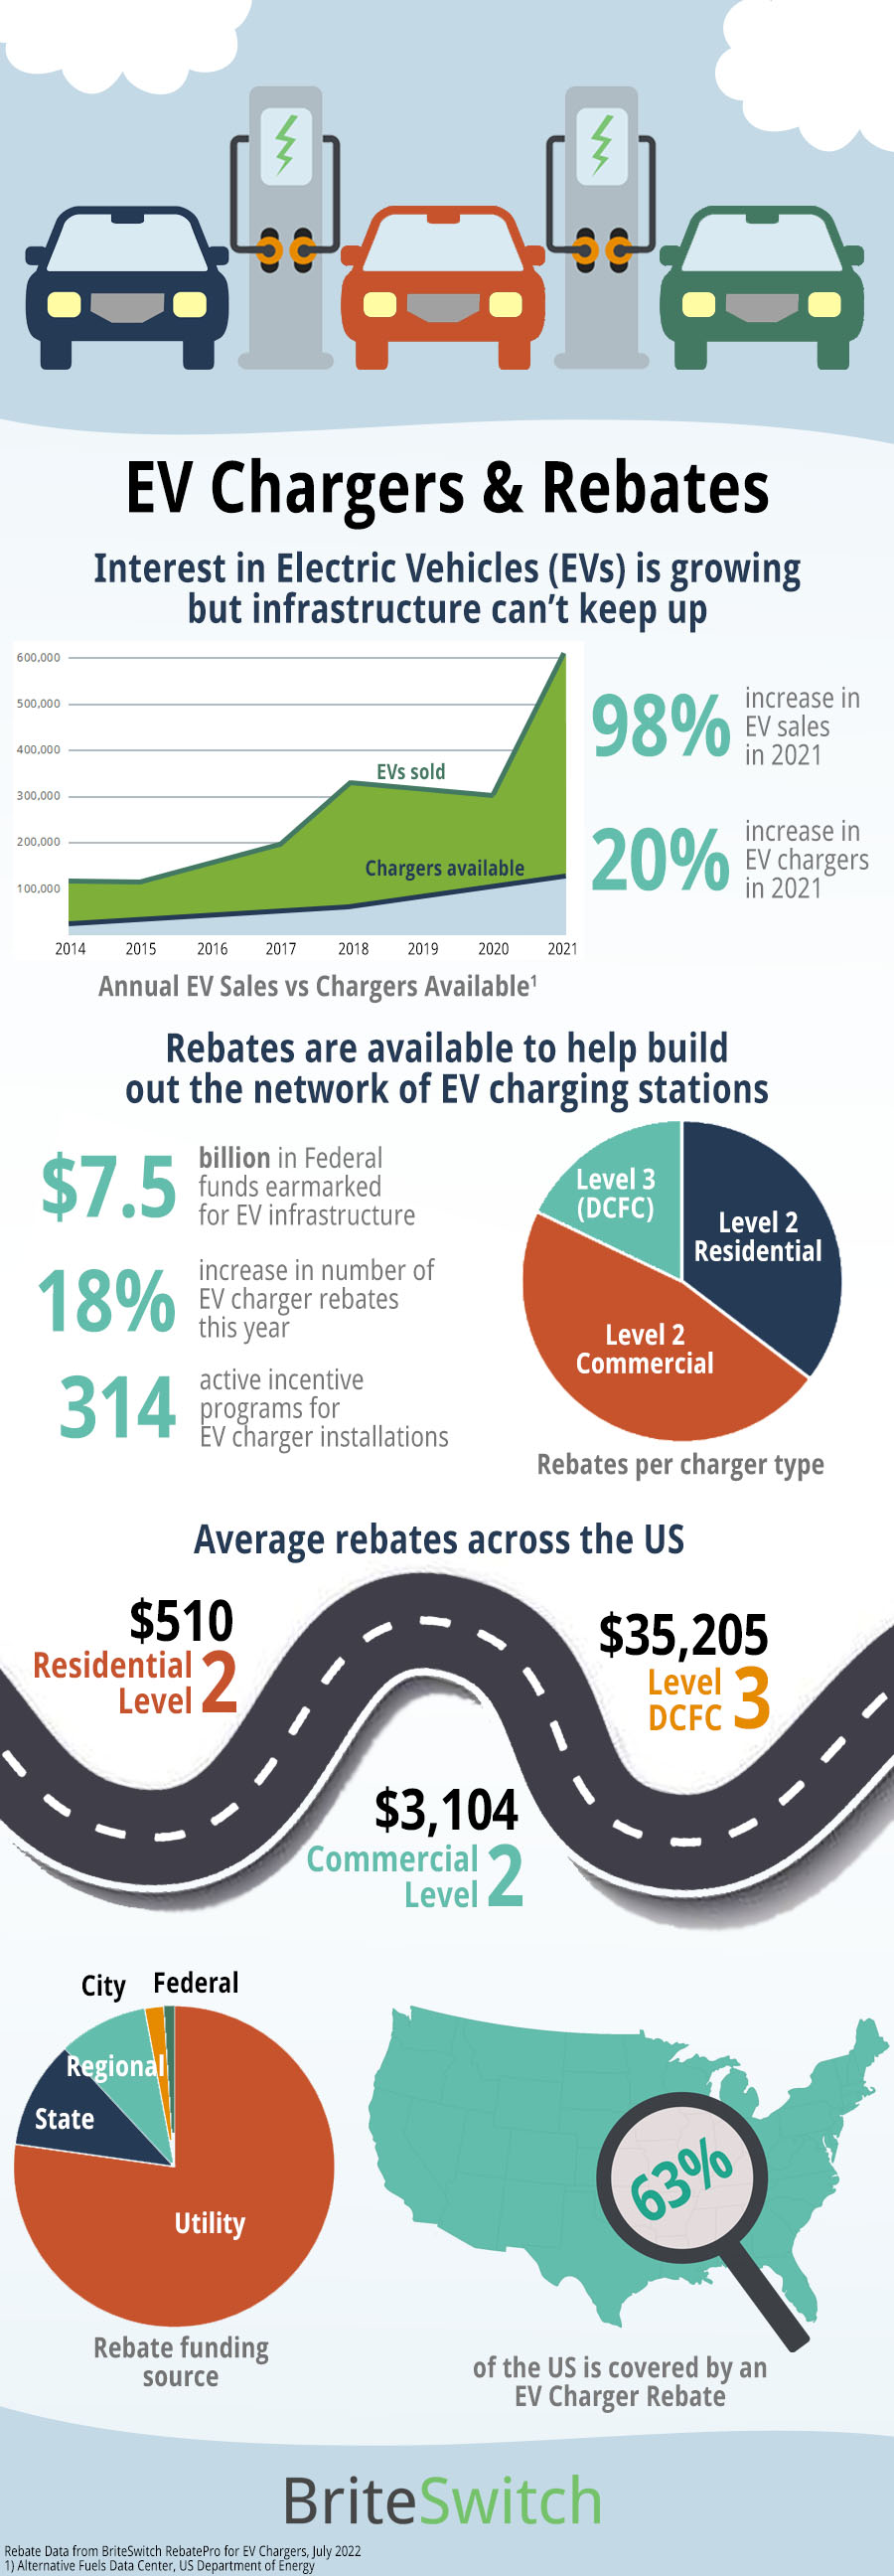 EV Chargers and Rebates Infographic